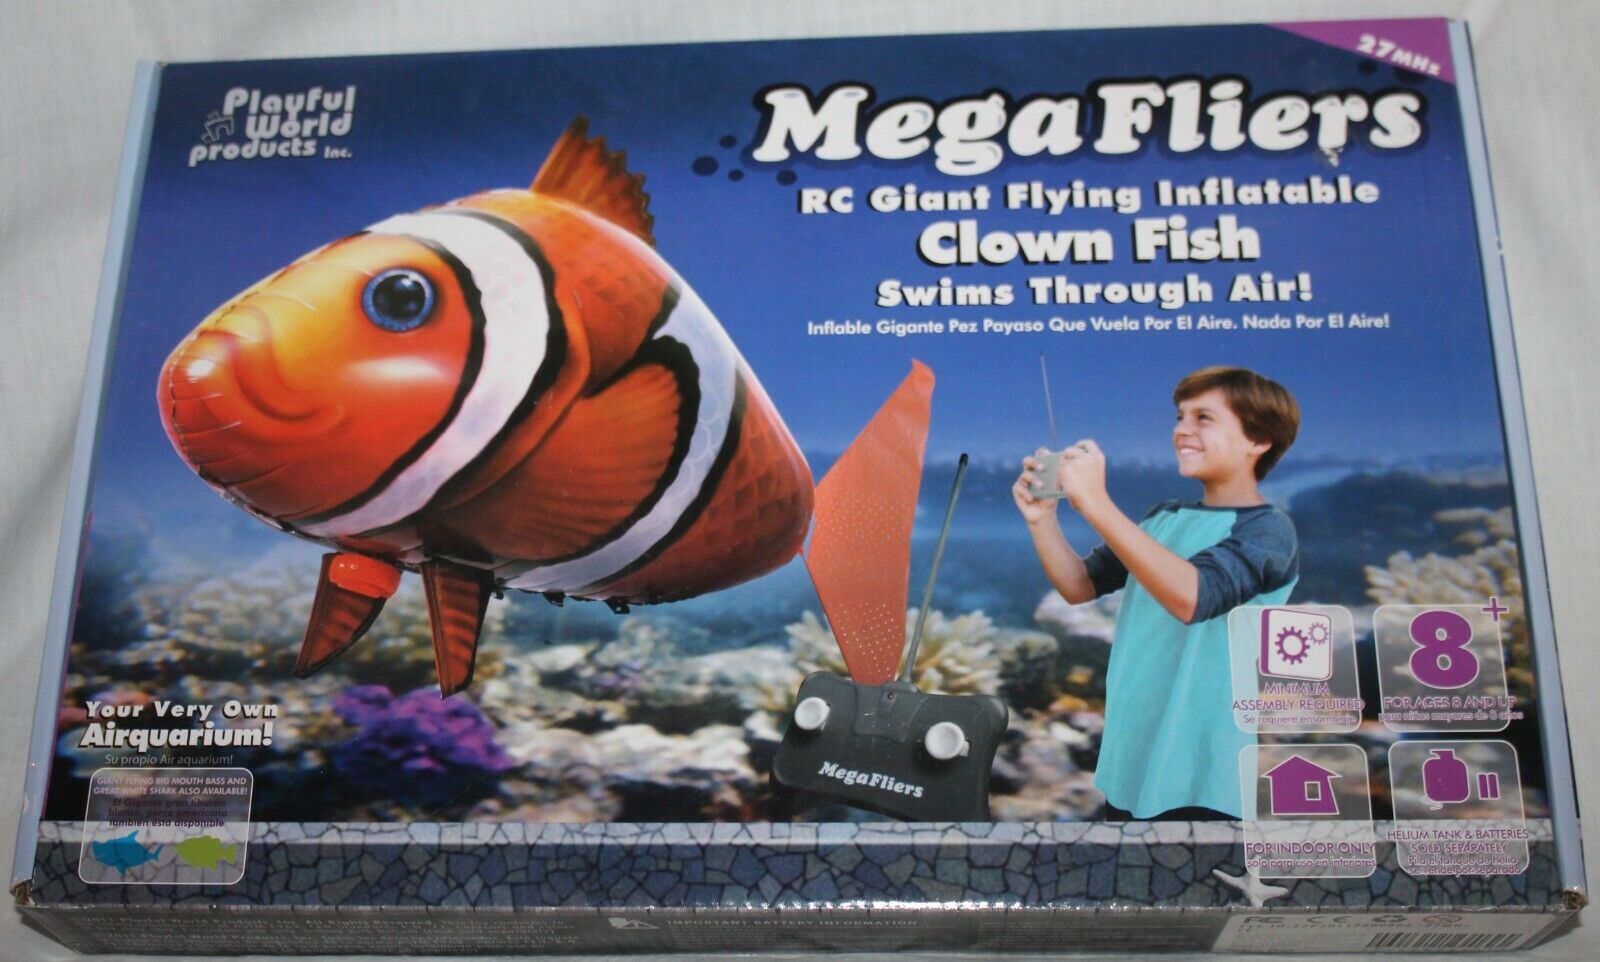 New 2011 Mega Fliers RC Giant Flying Inflatable Clown Fish Air Swimmer 27MHz 